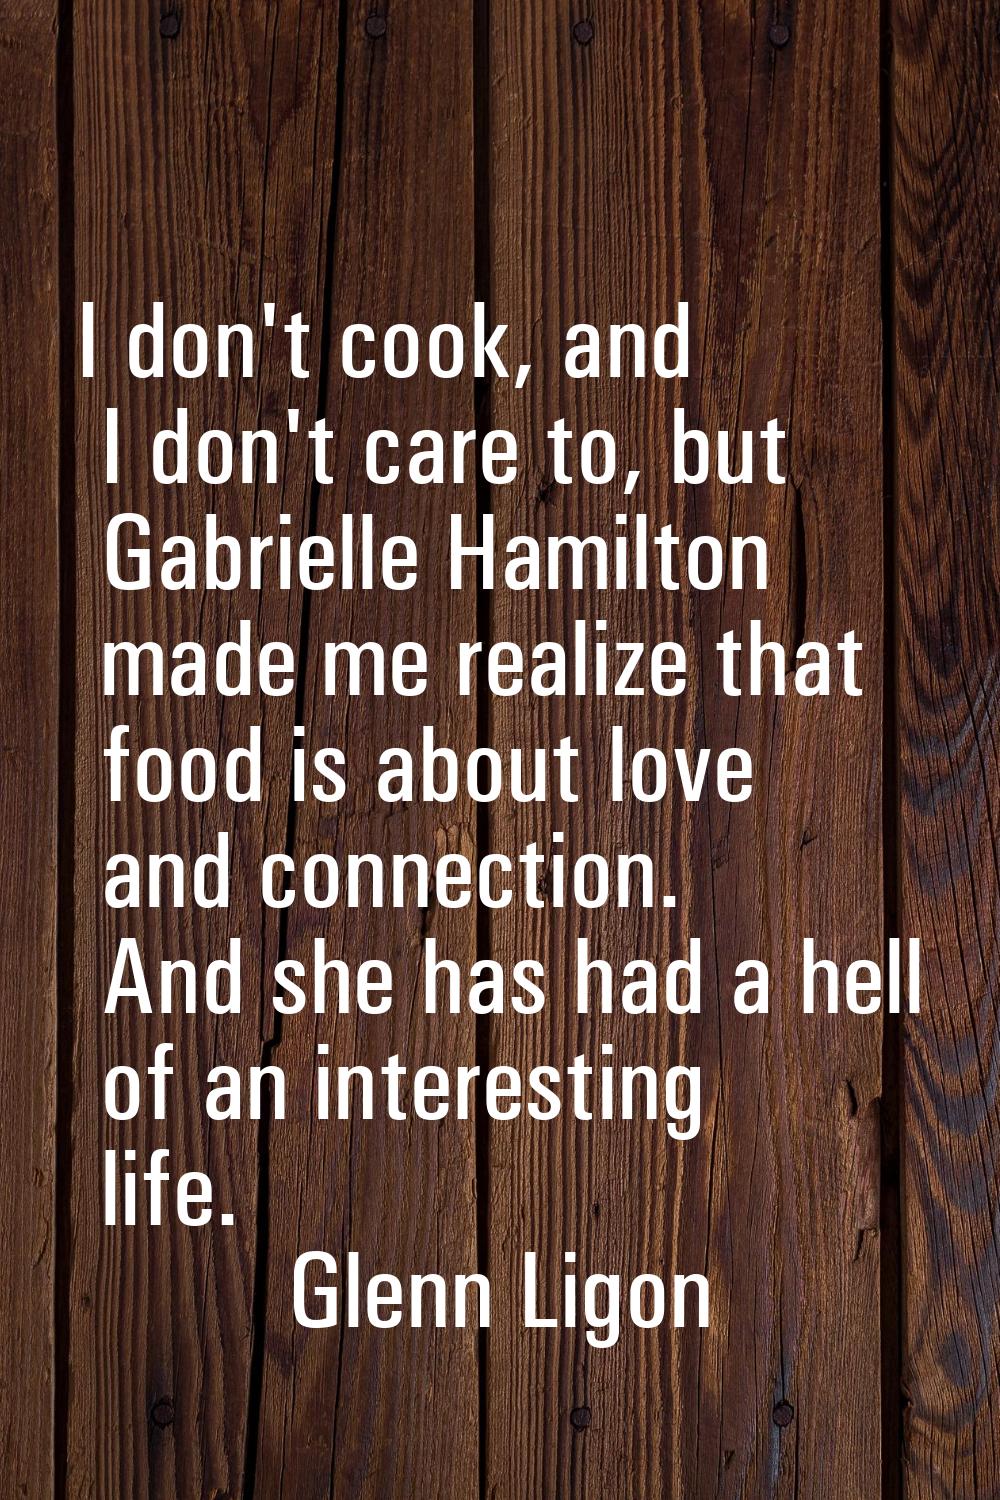 I don't cook, and I don't care to, but Gabrielle Hamilton made me realize that food is about love a